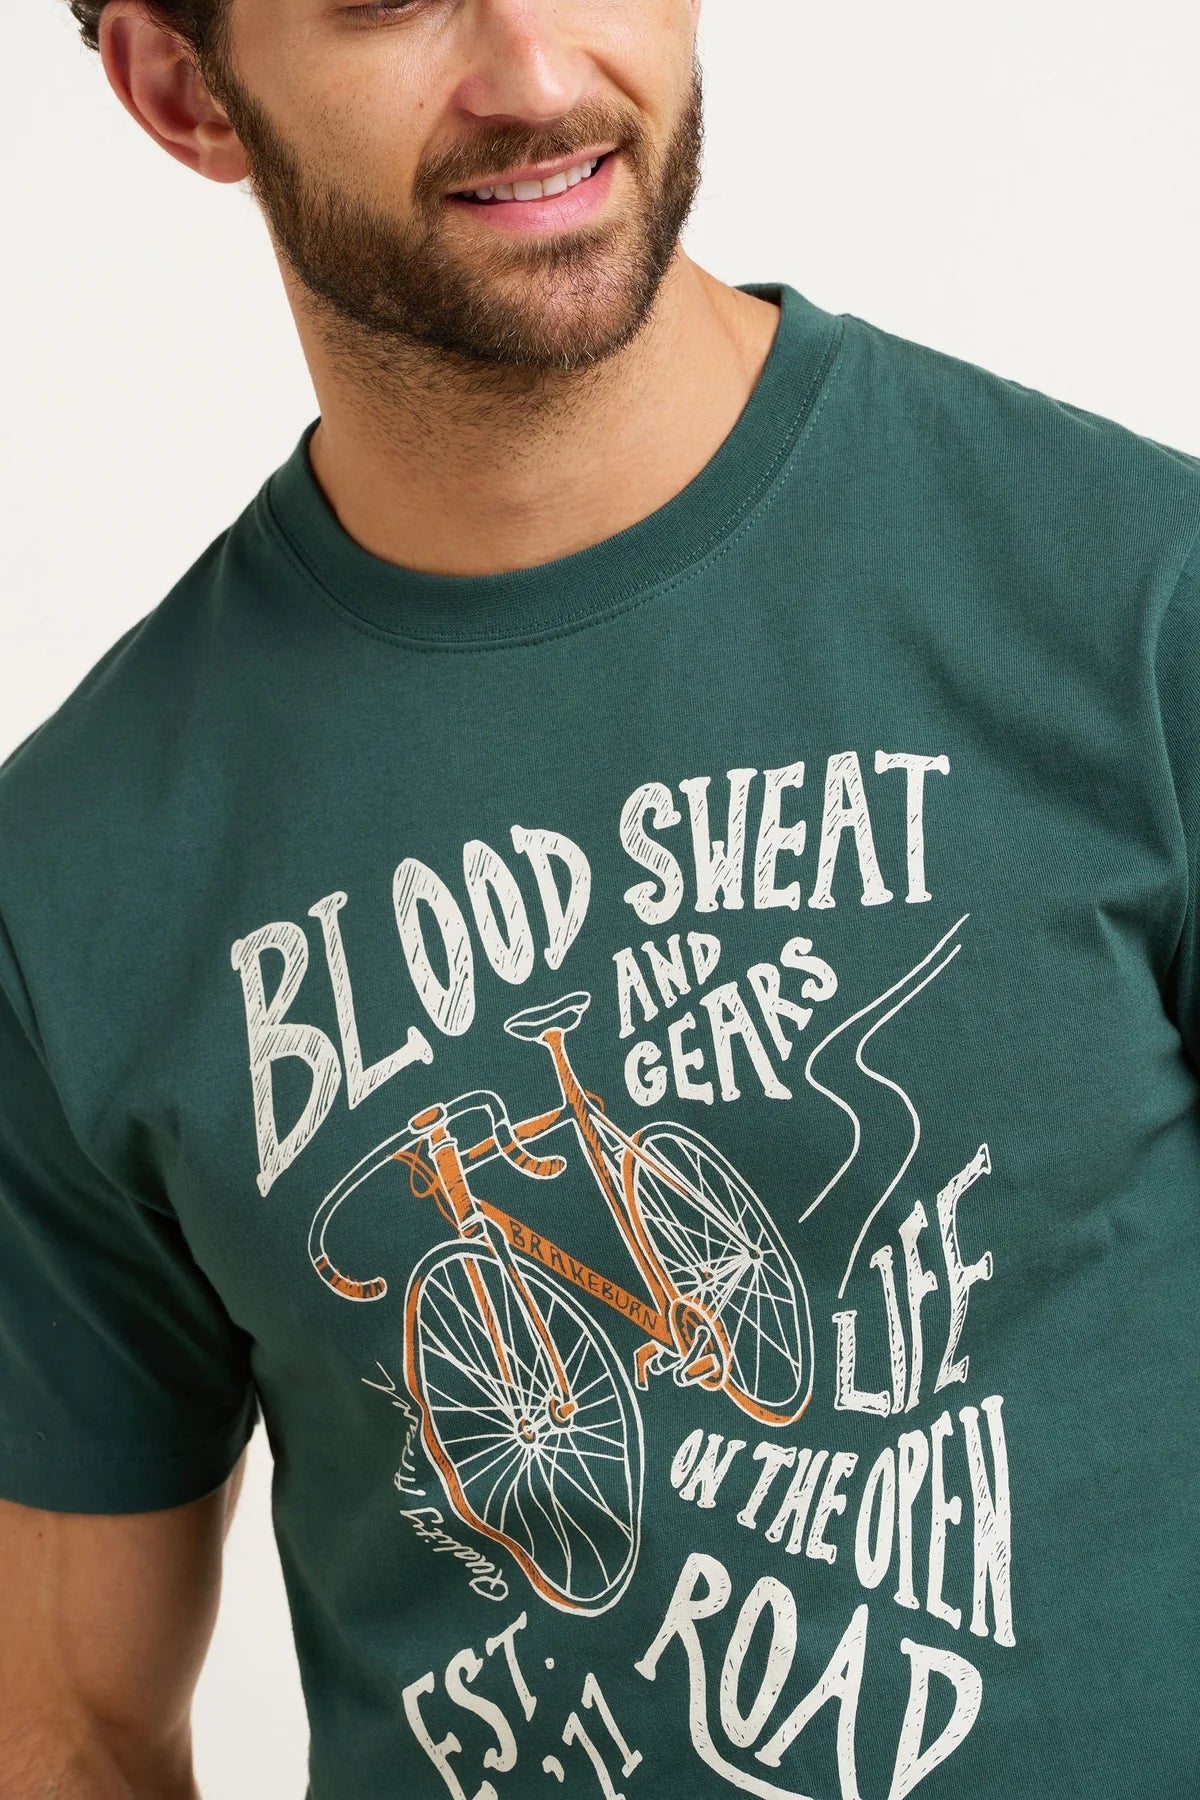 Bicycle themed Blood Sweat and Gears printed men's tee from Brakeburn.